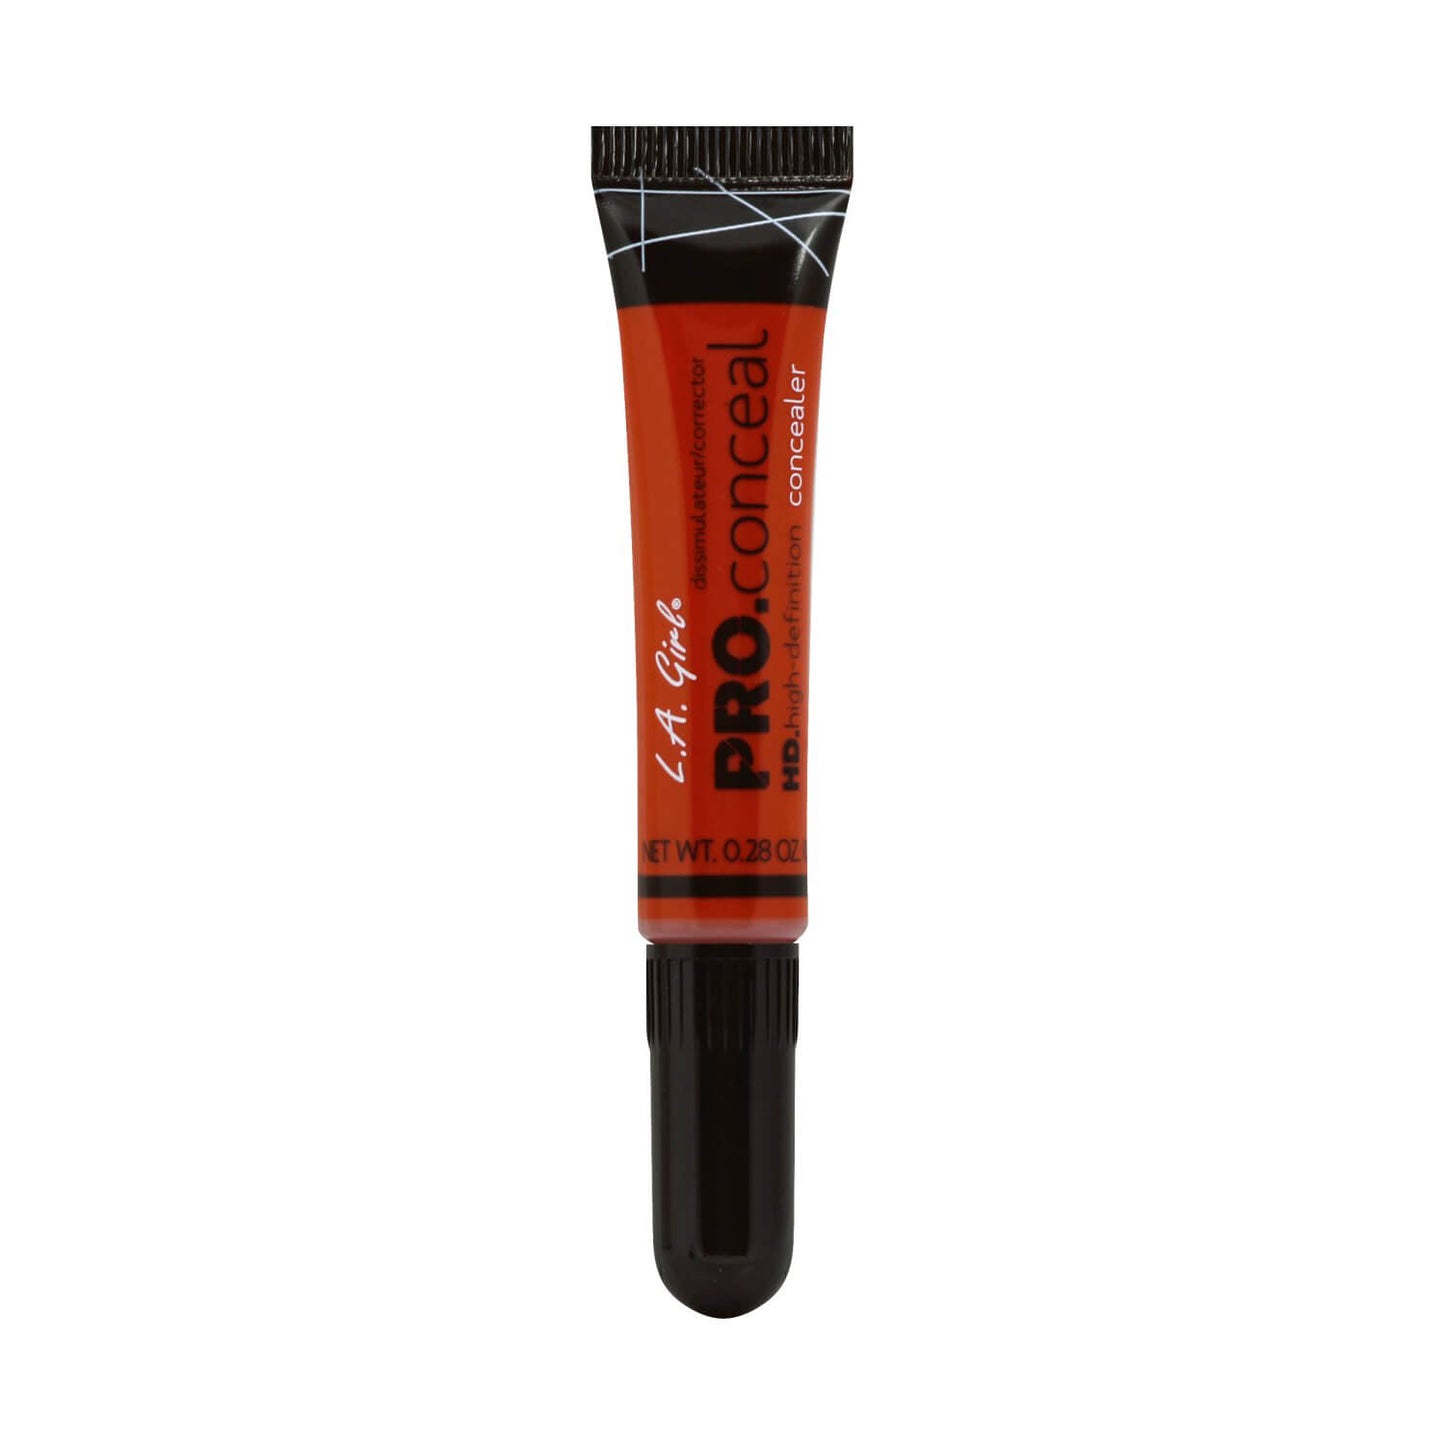 Shop 100% original LA Girl conceal corrector in red shade available at Heygirl.pk for delivery in Pakistan